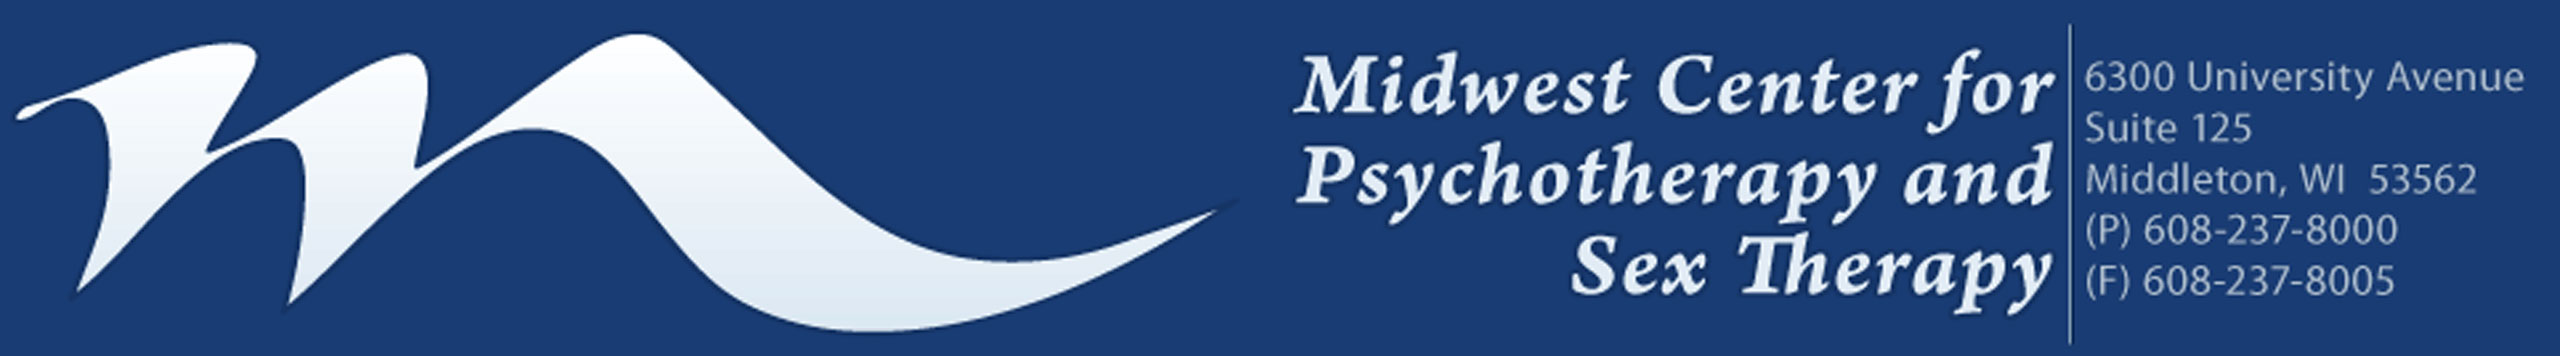 Midwest Center for Psychotherapy & Sex Therapy